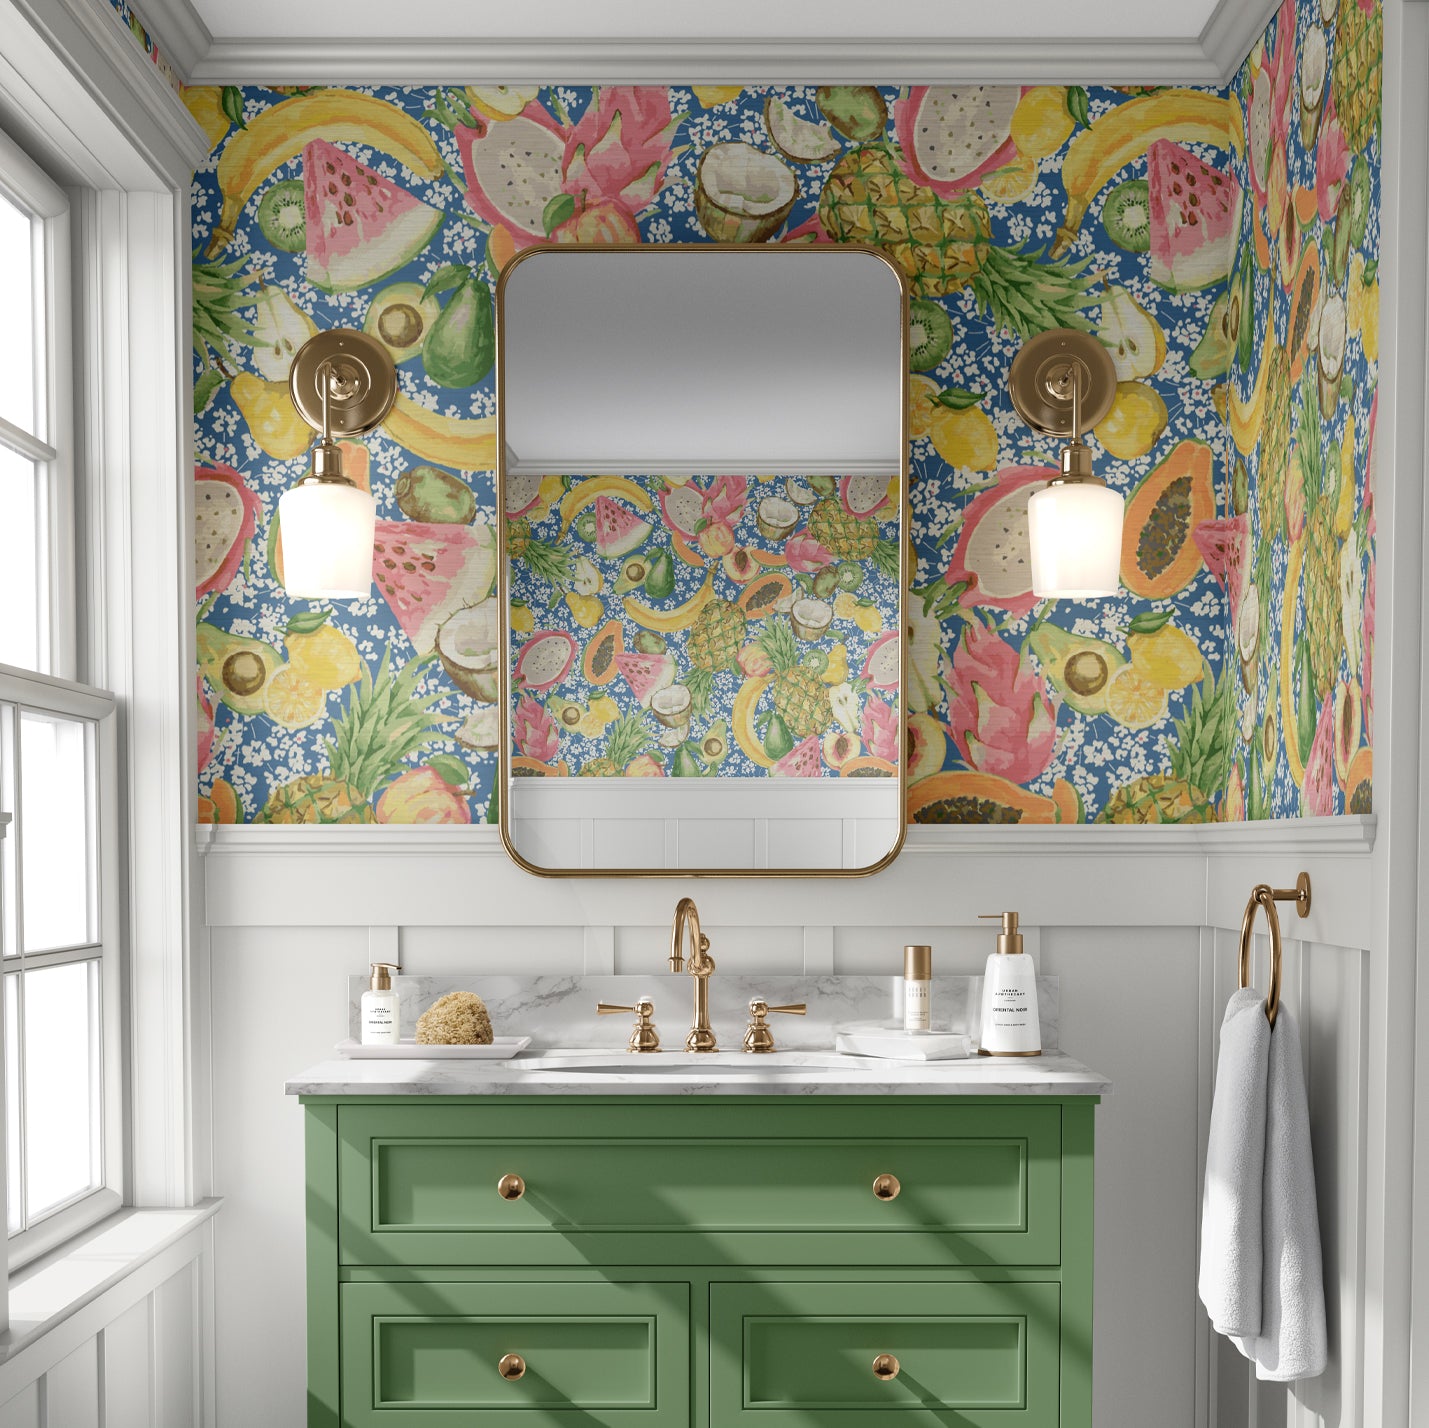 Load image into Gallery viewer, Bathroom with grasscloth wallpaper hand painted with watercolors, blue based print with white ditsy florals with tossed fruit layered on top including: pineapples, limes, bananas, avocados, lemons, pears, peaches, watermelon, coconuts, mangos, bananas and passion fruit
